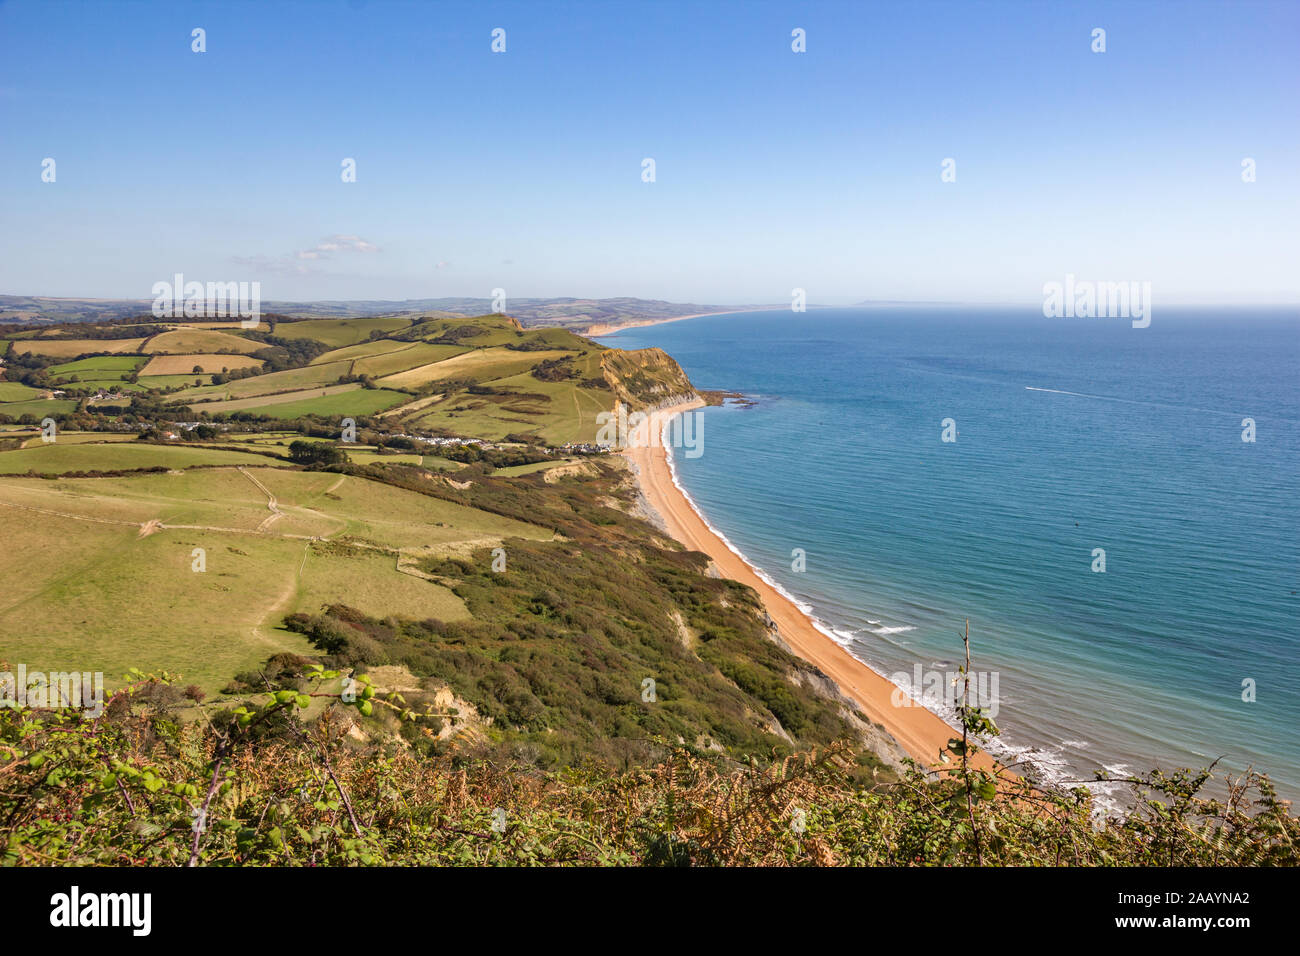 Far reaching view out to the English Channel sea from the top of Golden Cap hill in West Dorset, England, with background view of Bridport sandstone c Stock Photo